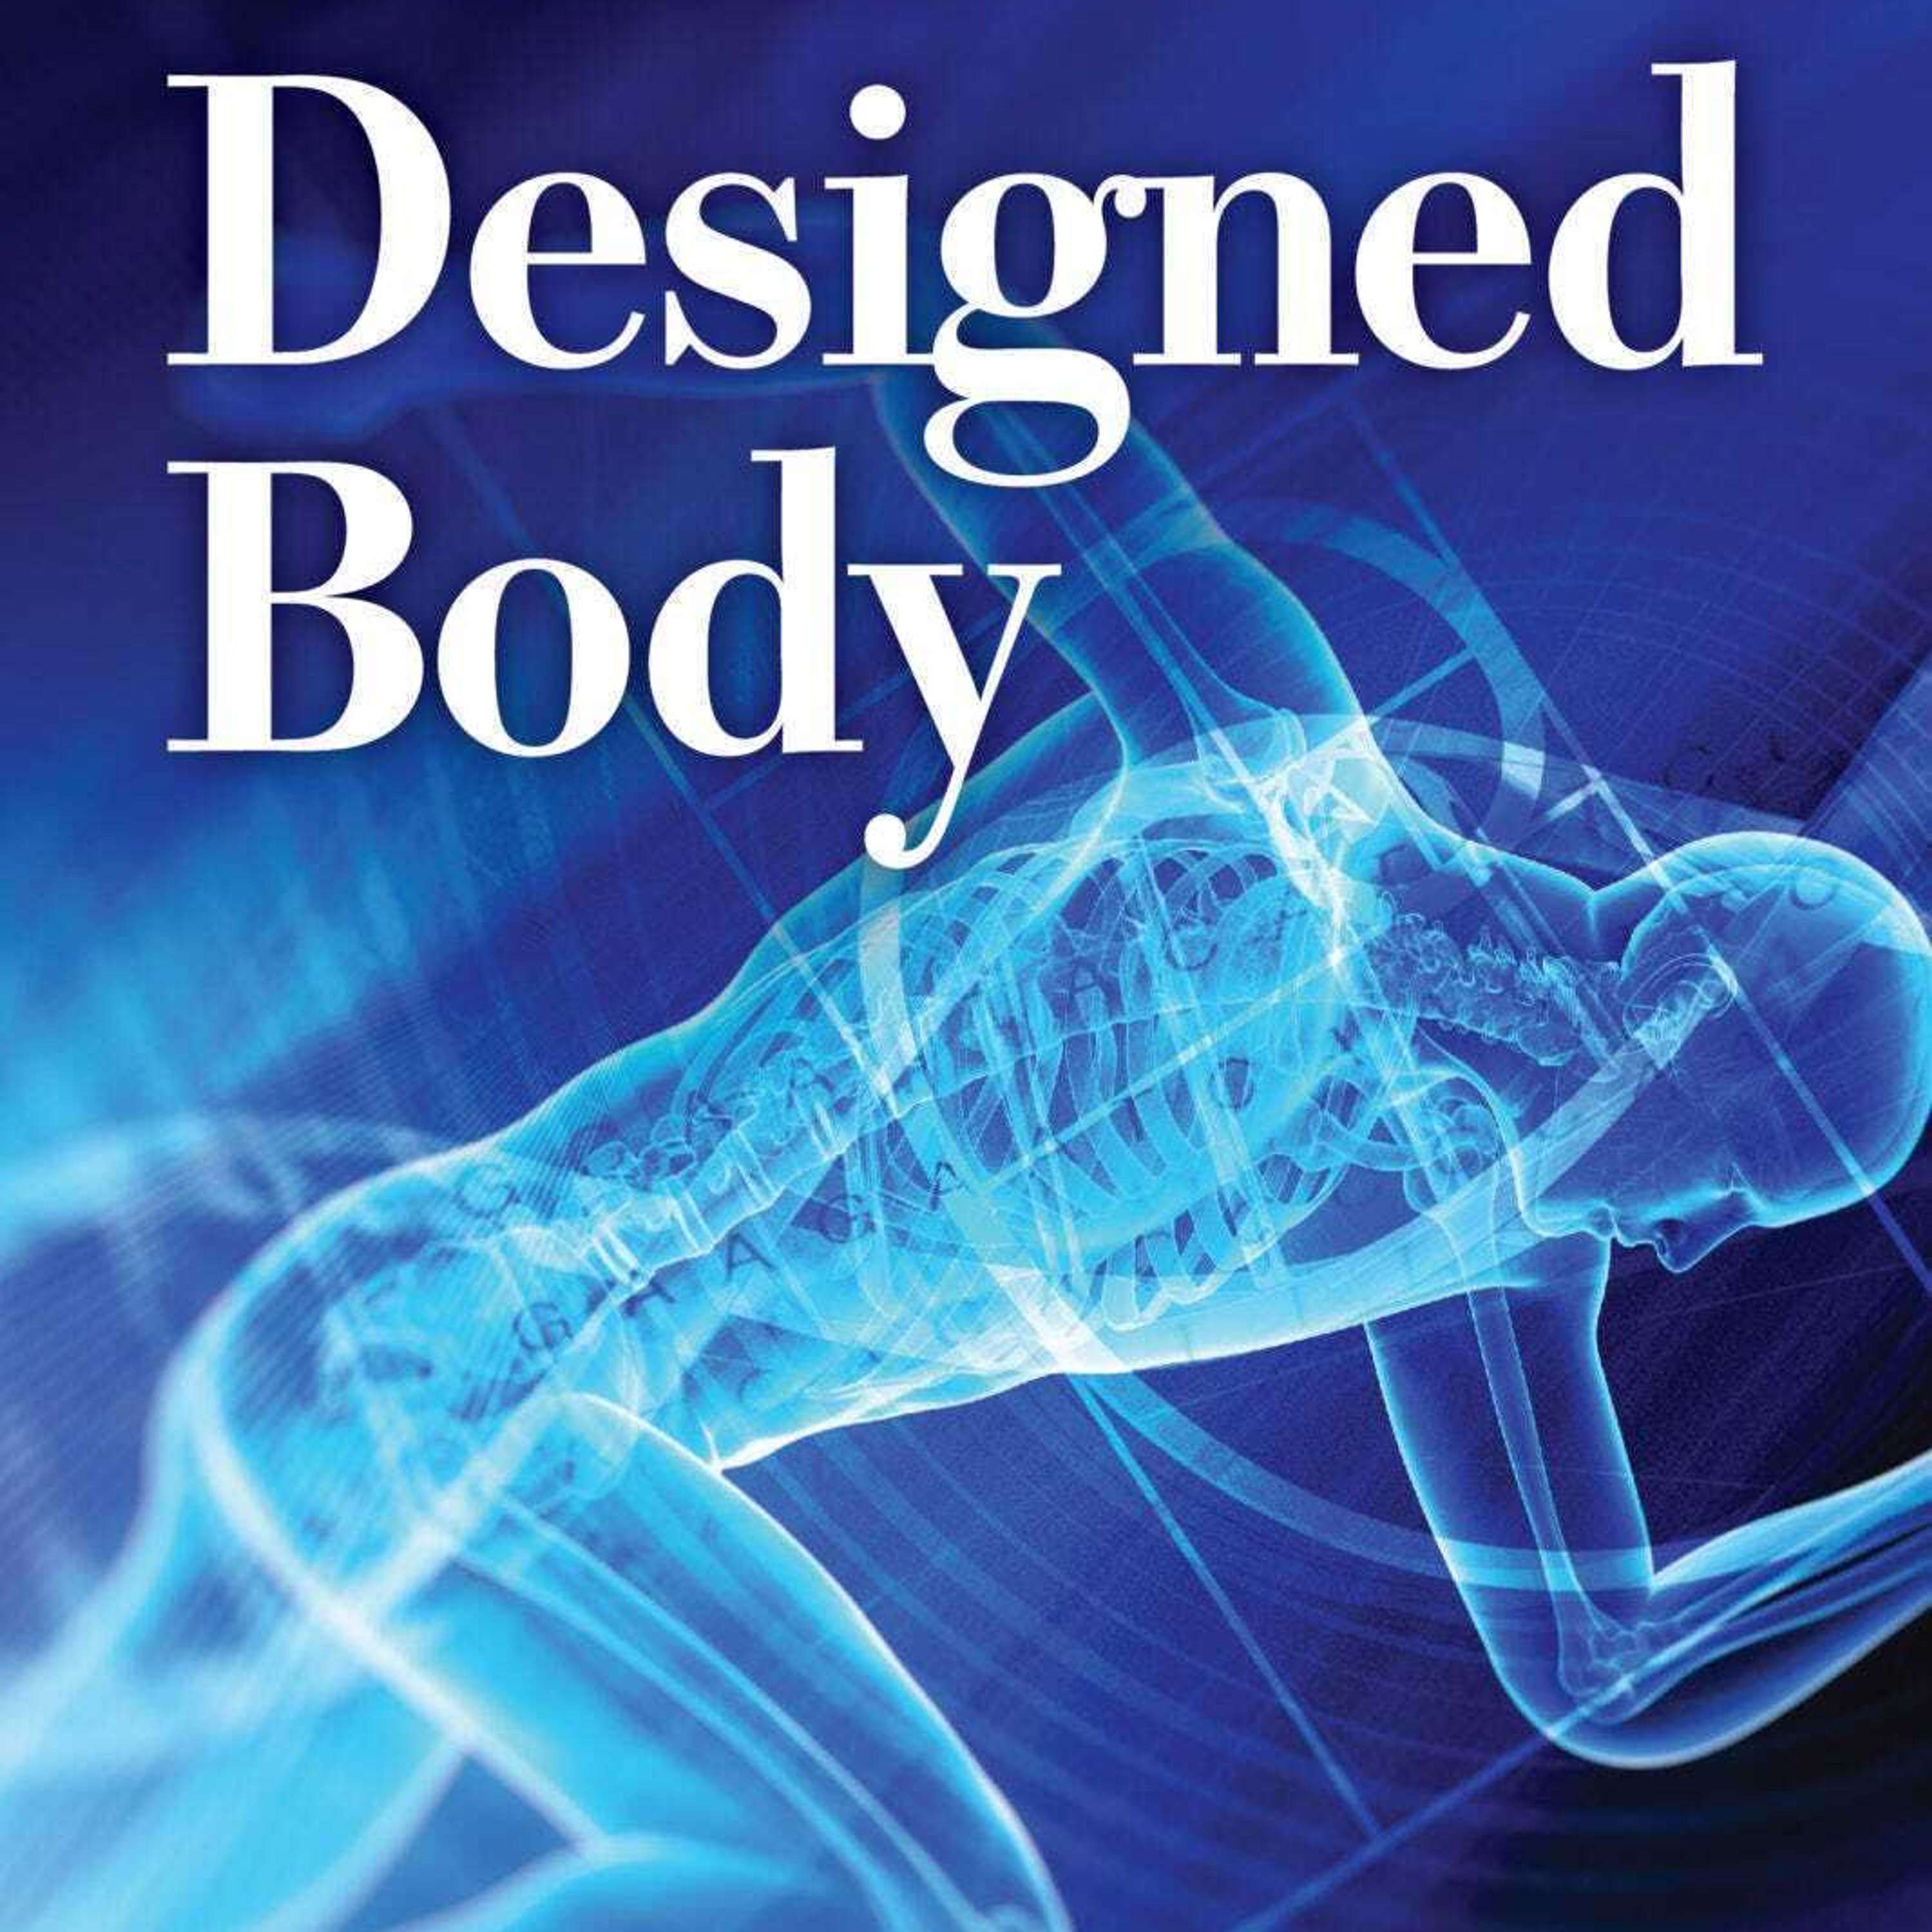 Your Designed Body